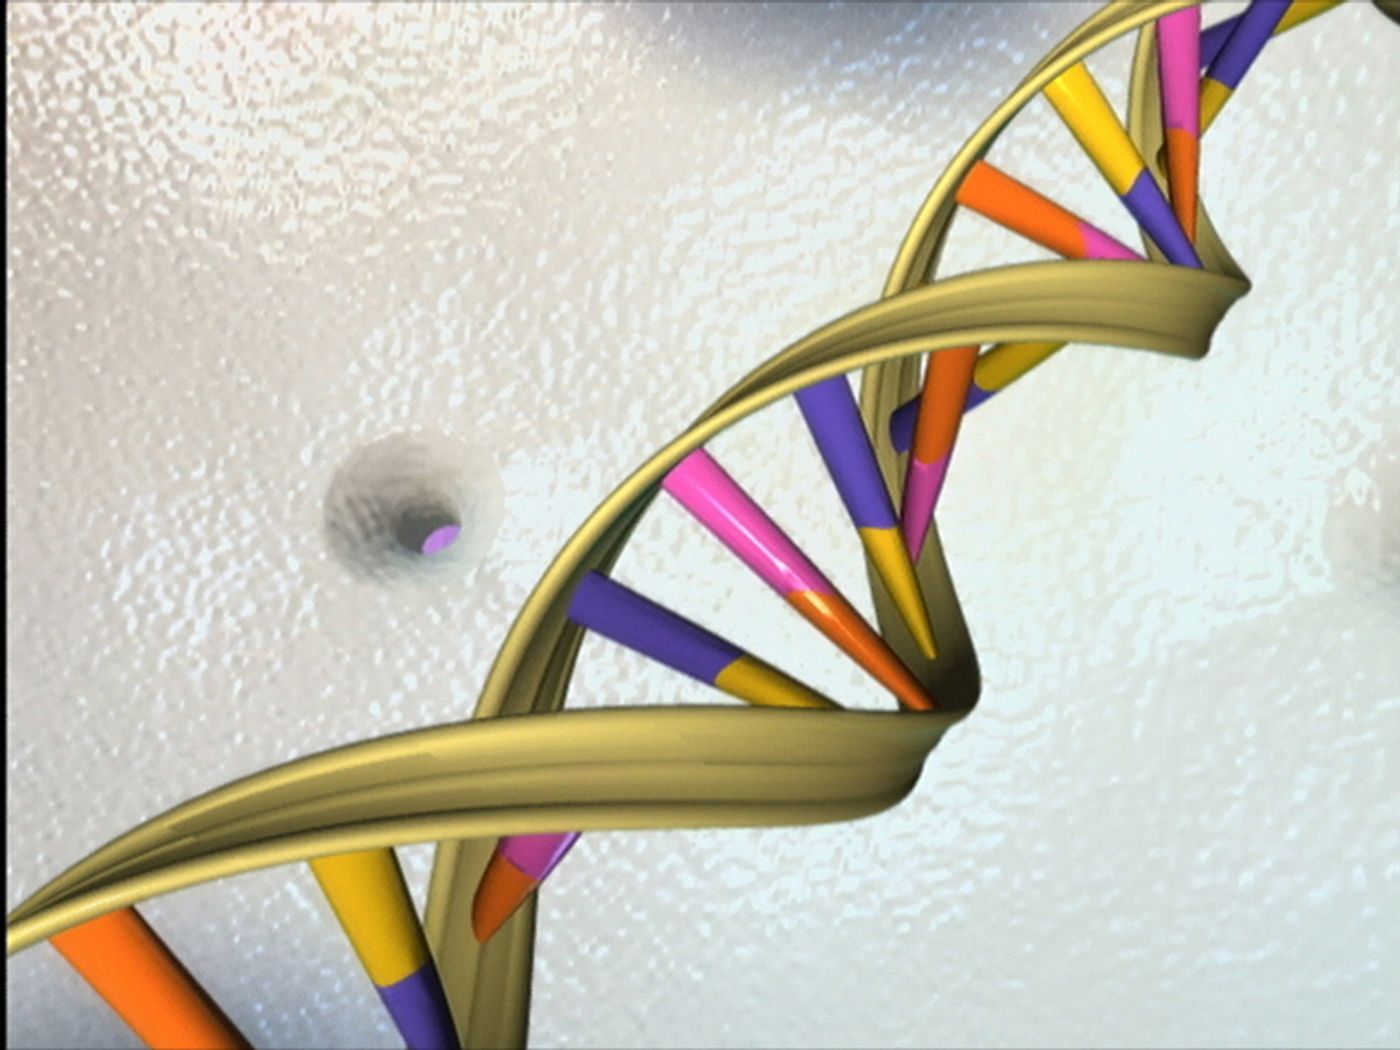 DNA Double Helix  Credit: National Human Genome Research Institute, National Institutes of Health. www.genome.gov 